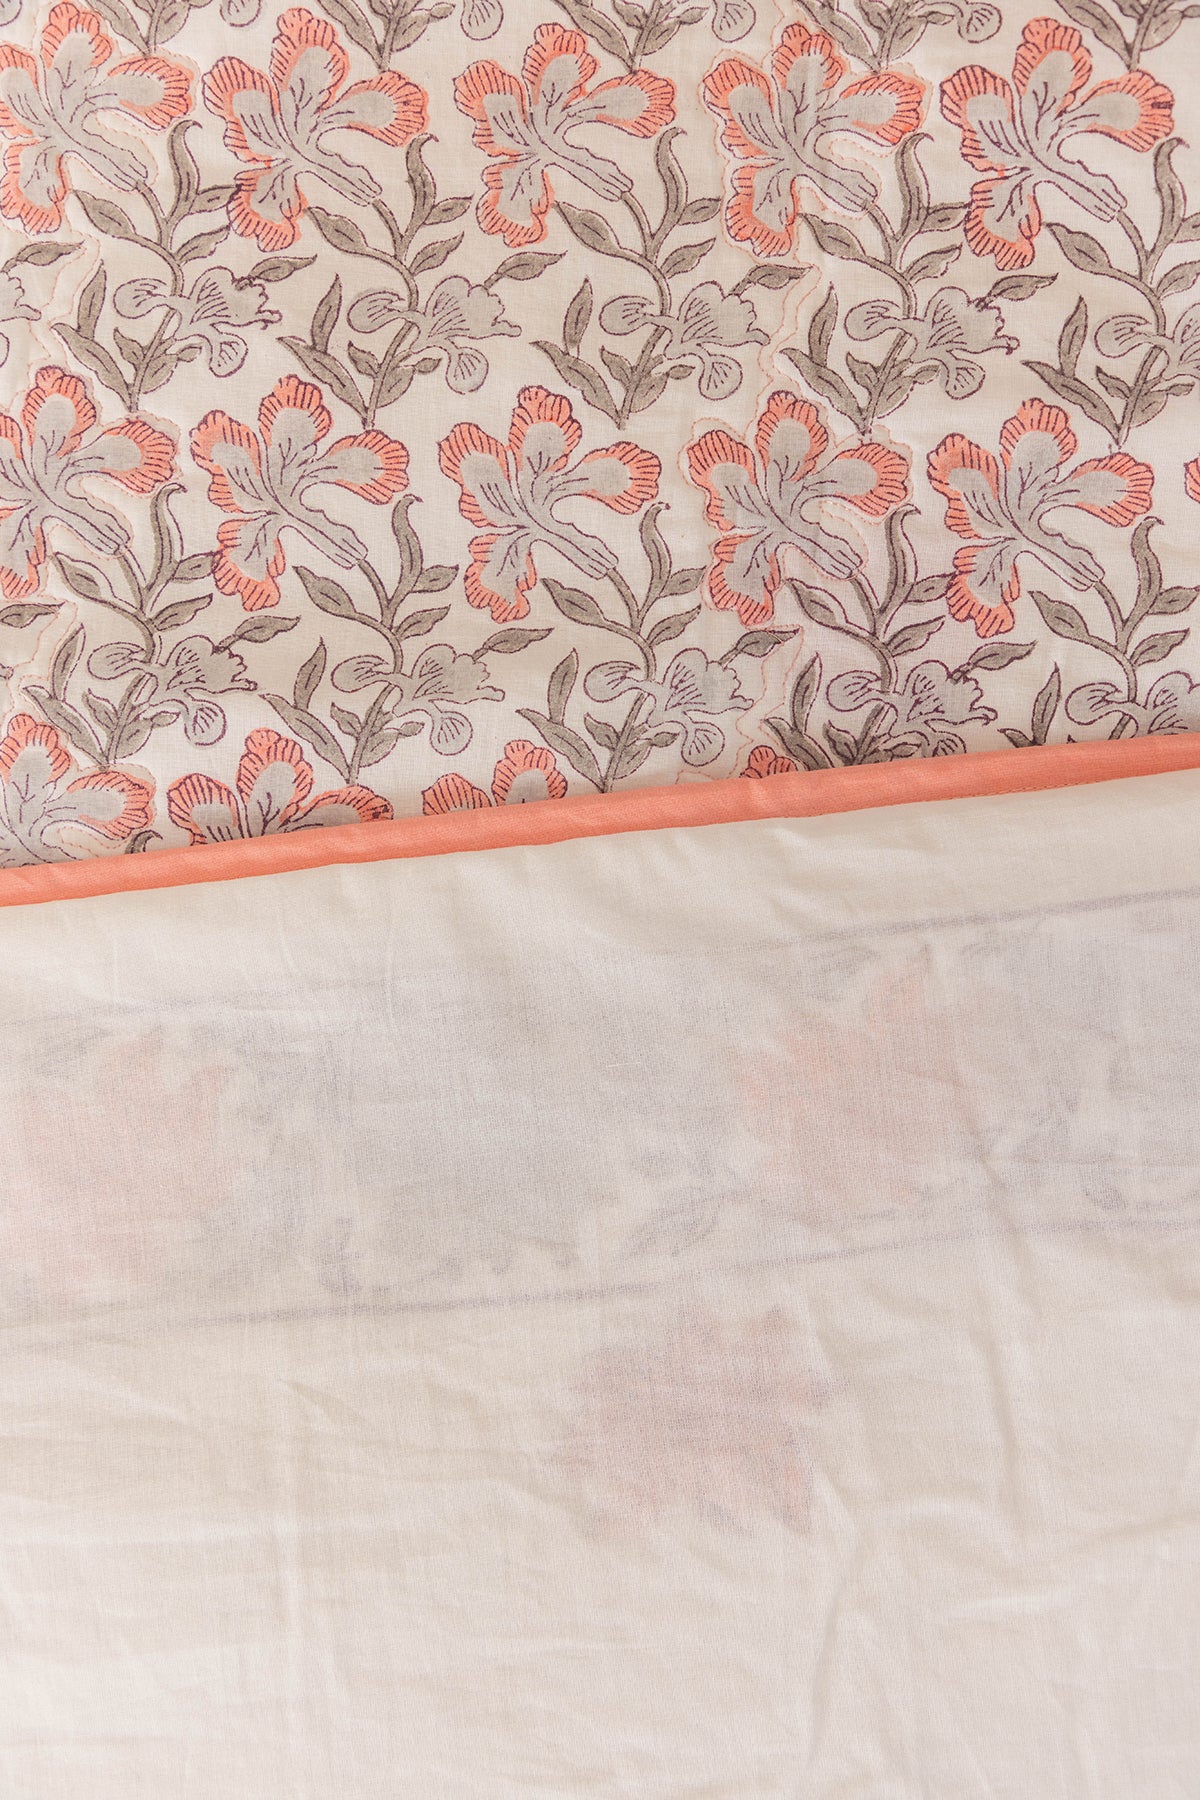 Peach & Grey Quilted Bedcover